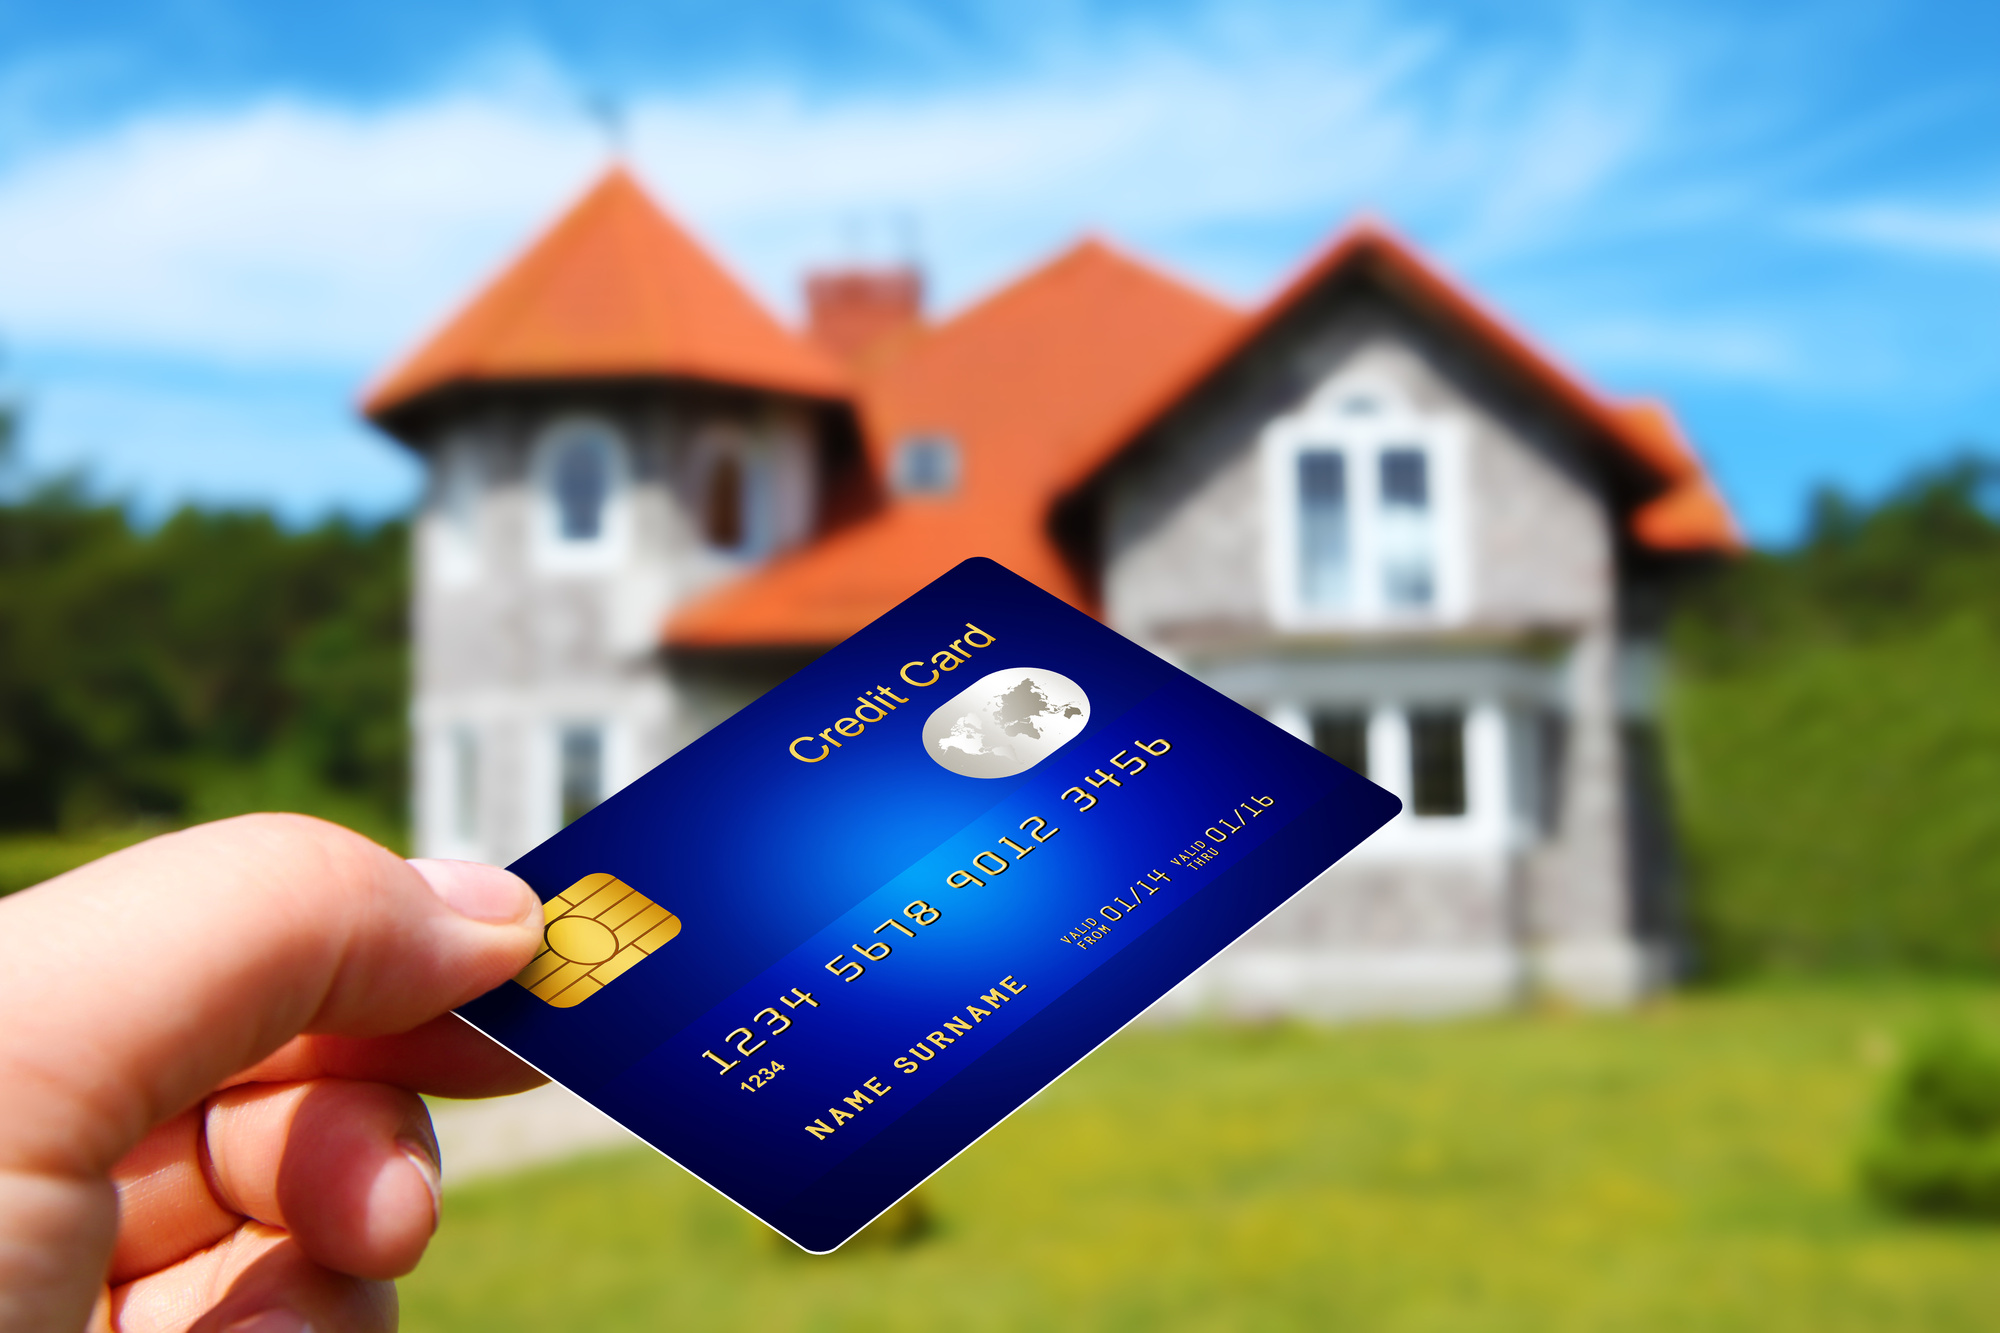 Can You Buy a House With a Credit Card?